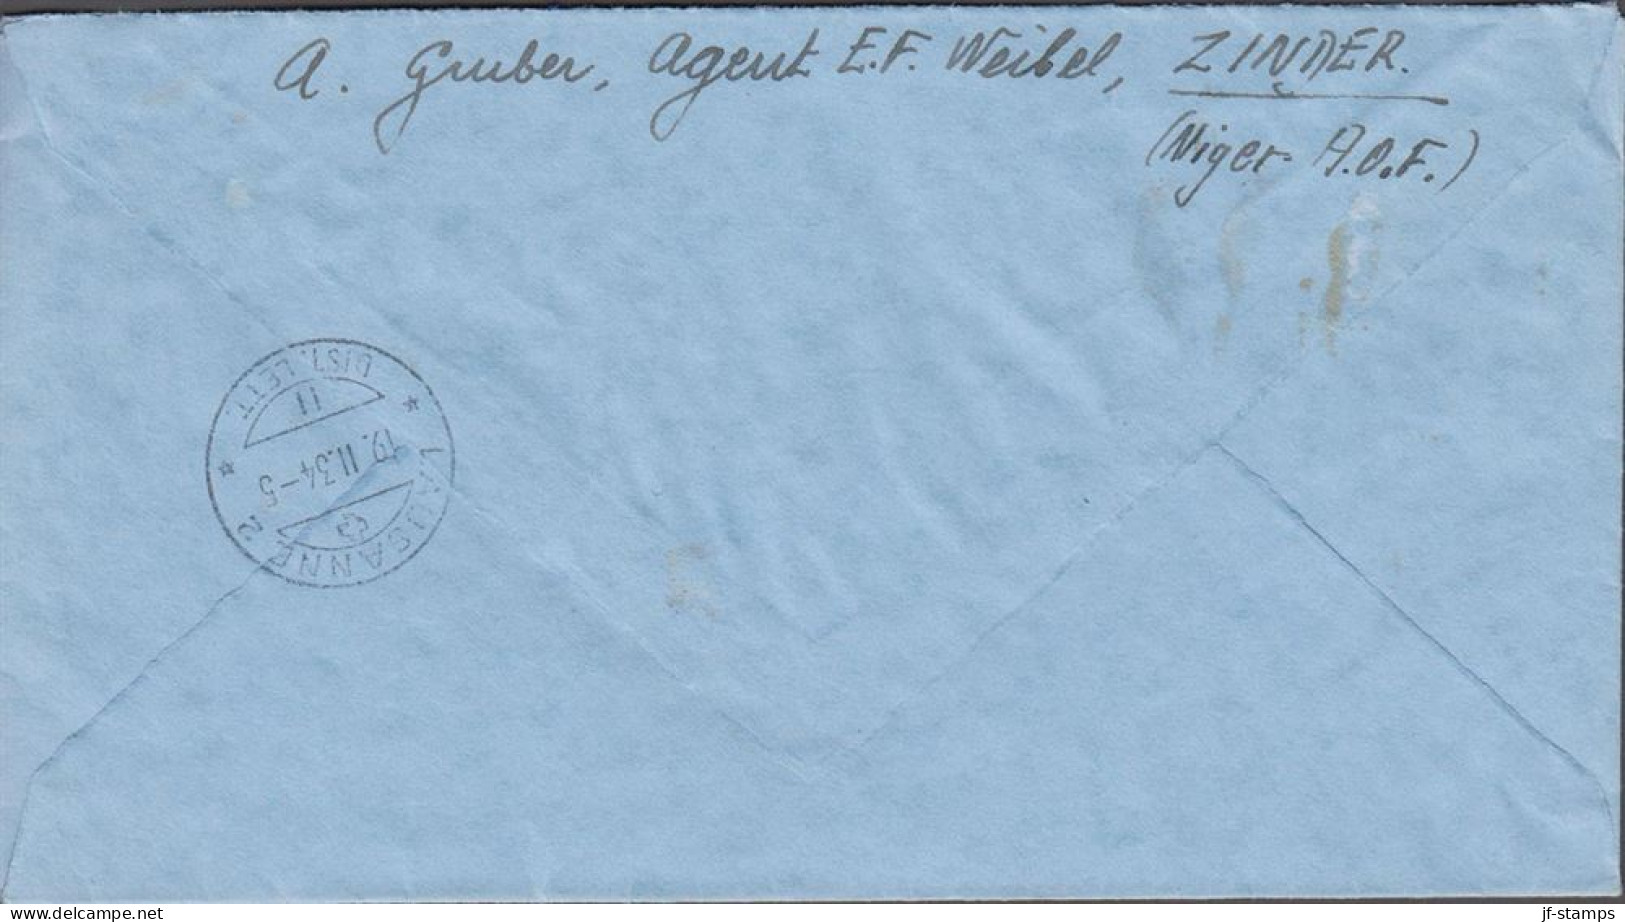 1934. NIGER. Rare Registered Cover To Lausanne, Suisse With Margin 4block (number B 23012 15)... (MICHEL 17+) - JF545402 - Oblitérés